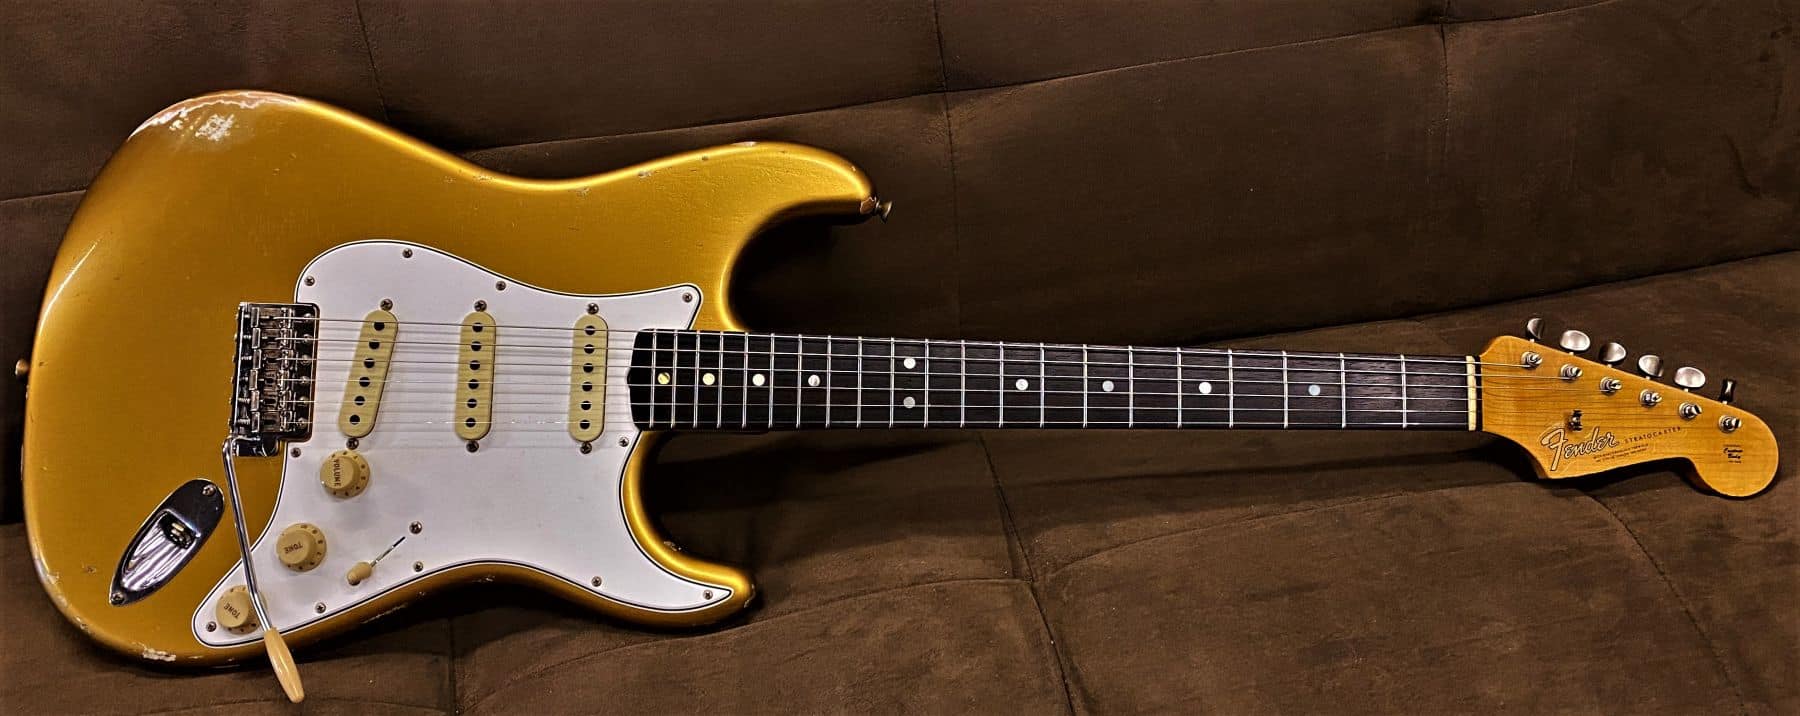 1964 relic stratocaster front